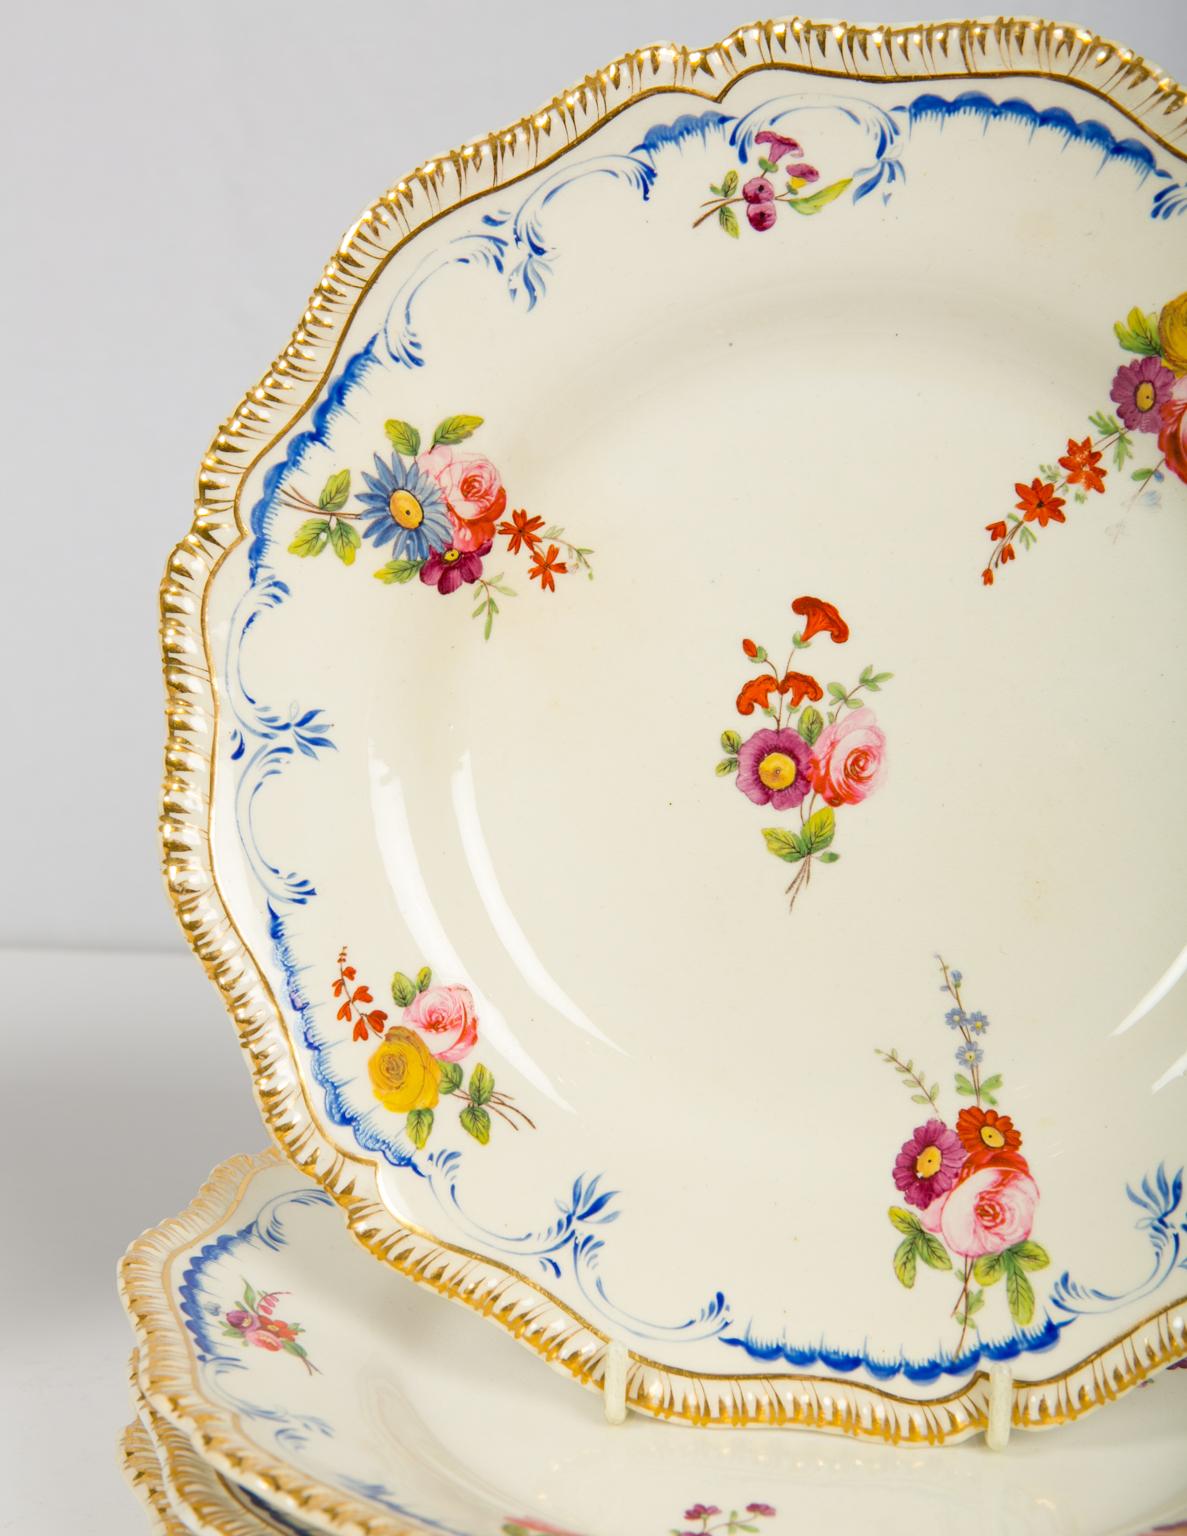 Painted Set of Four Antique Dinner Plates Made by Coalport in the Early 19th Century